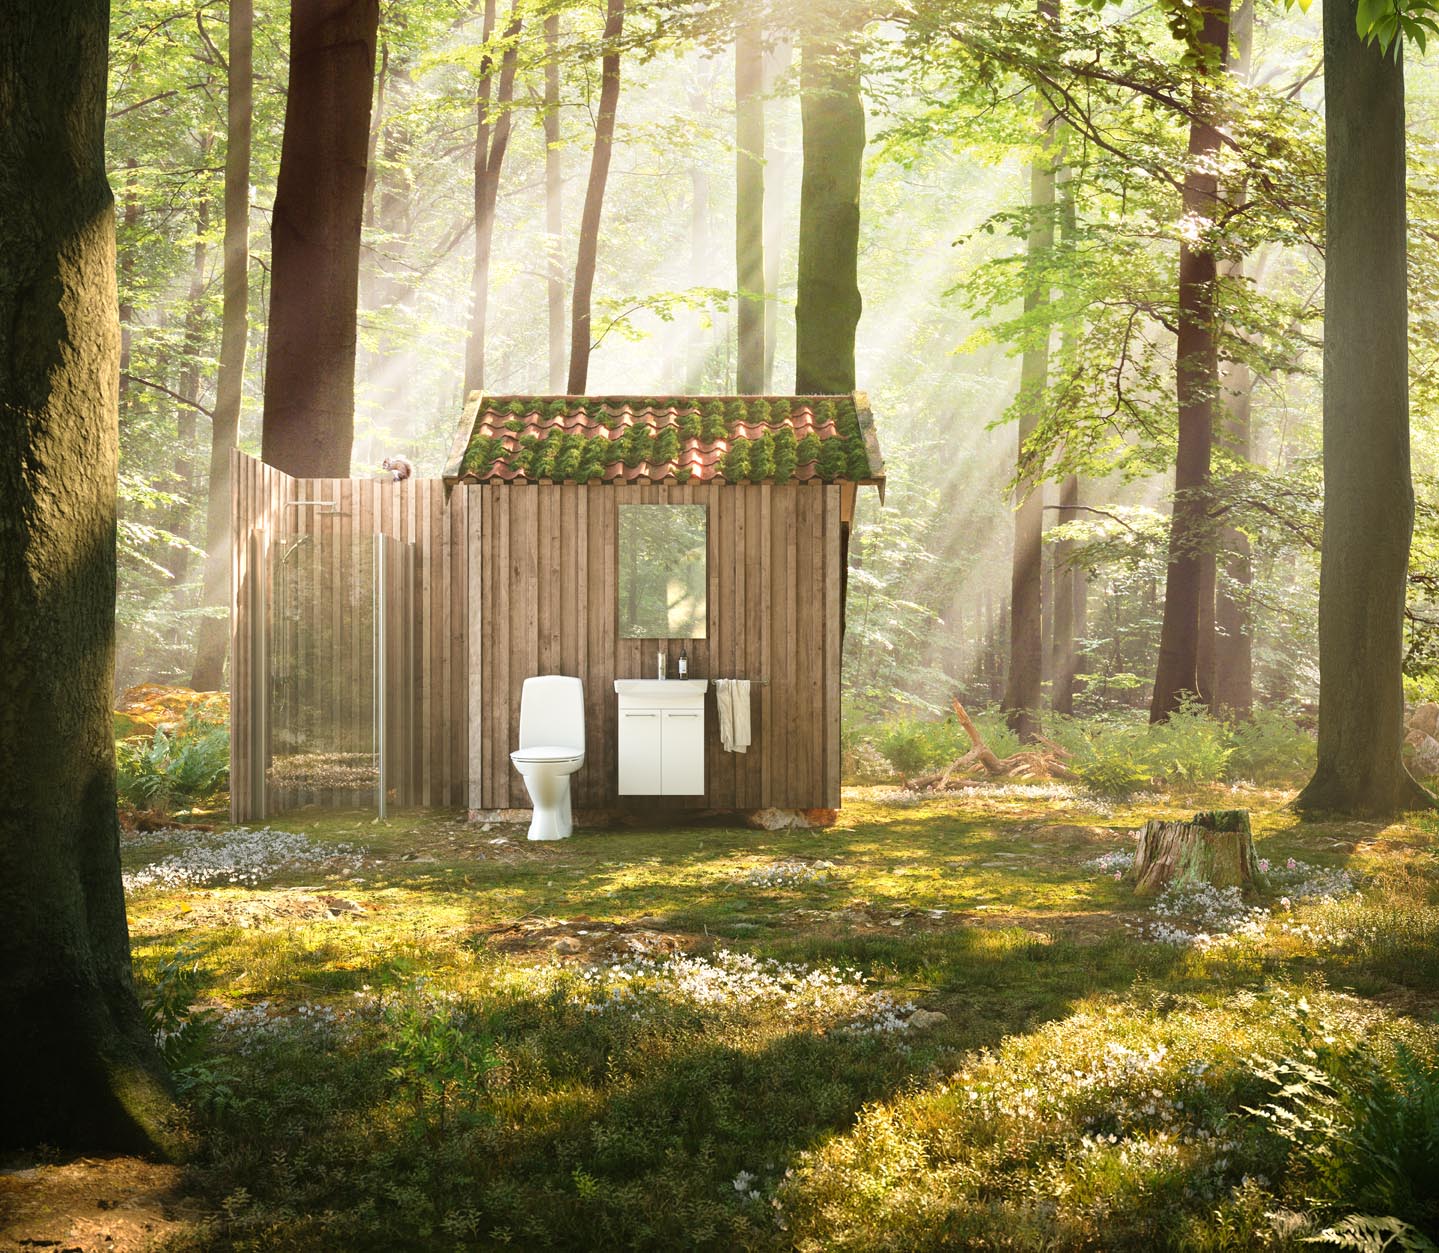 Ifö are focusing on the environment when they design their toilets, so the water consumption is kept to a minimum.